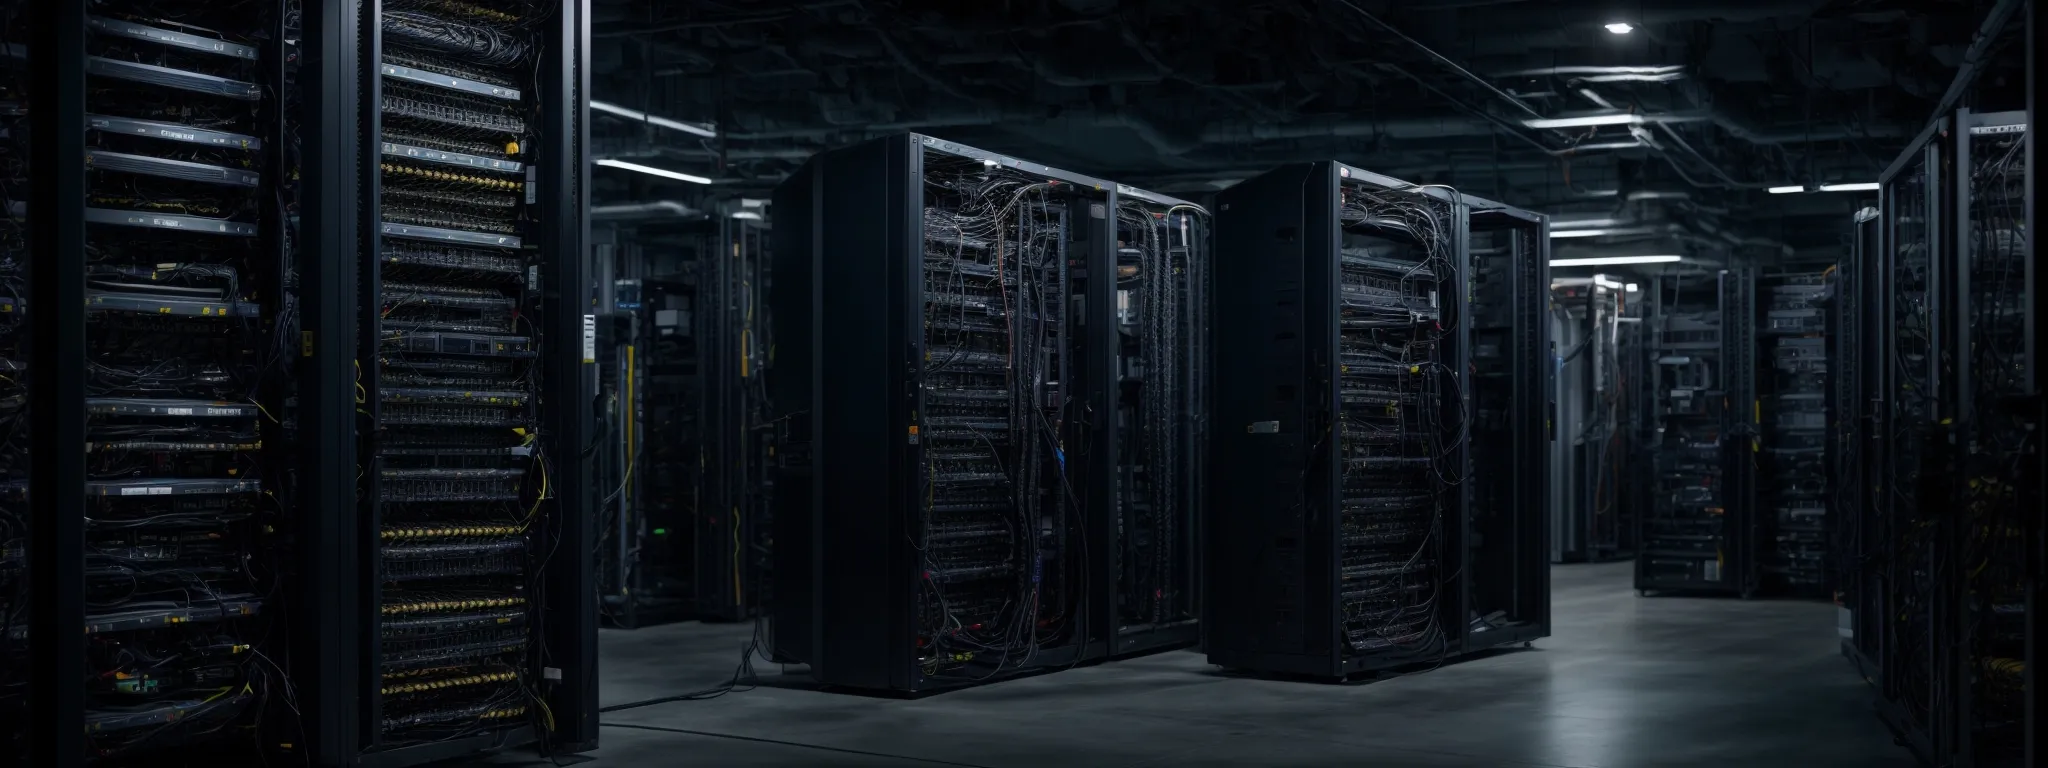 a server room filled with racks of network equipment, symbolizing the backbone of internet infrastructure and the focus on secure web practices.